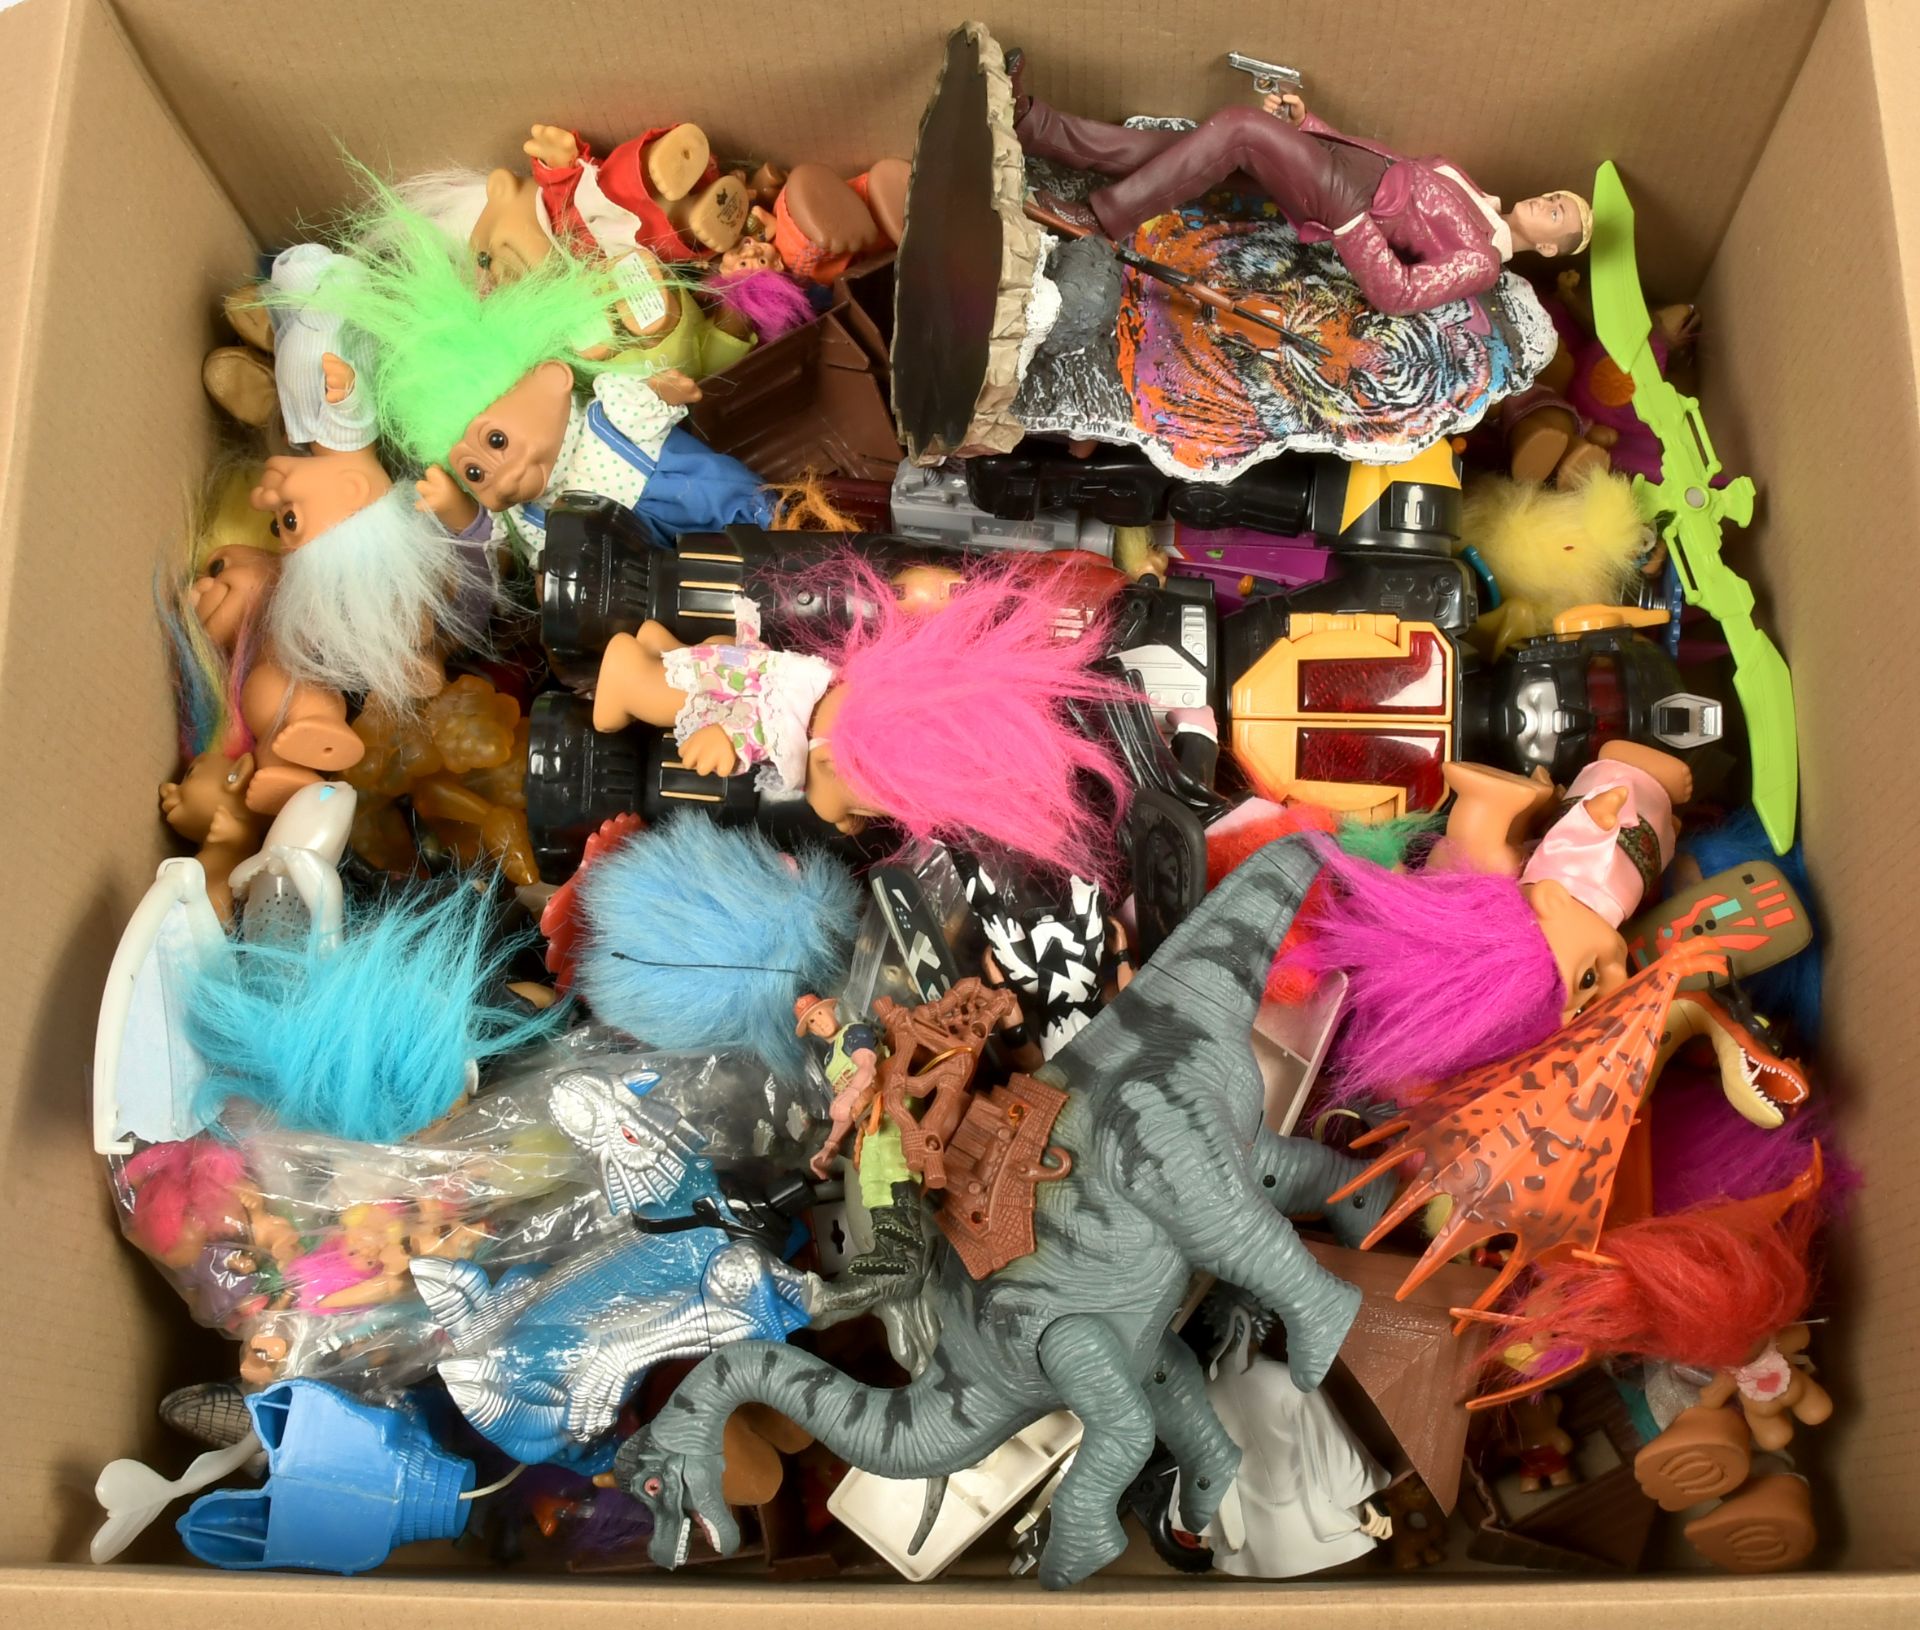 Quantity of Loose Mixed Action Figures and Dolls